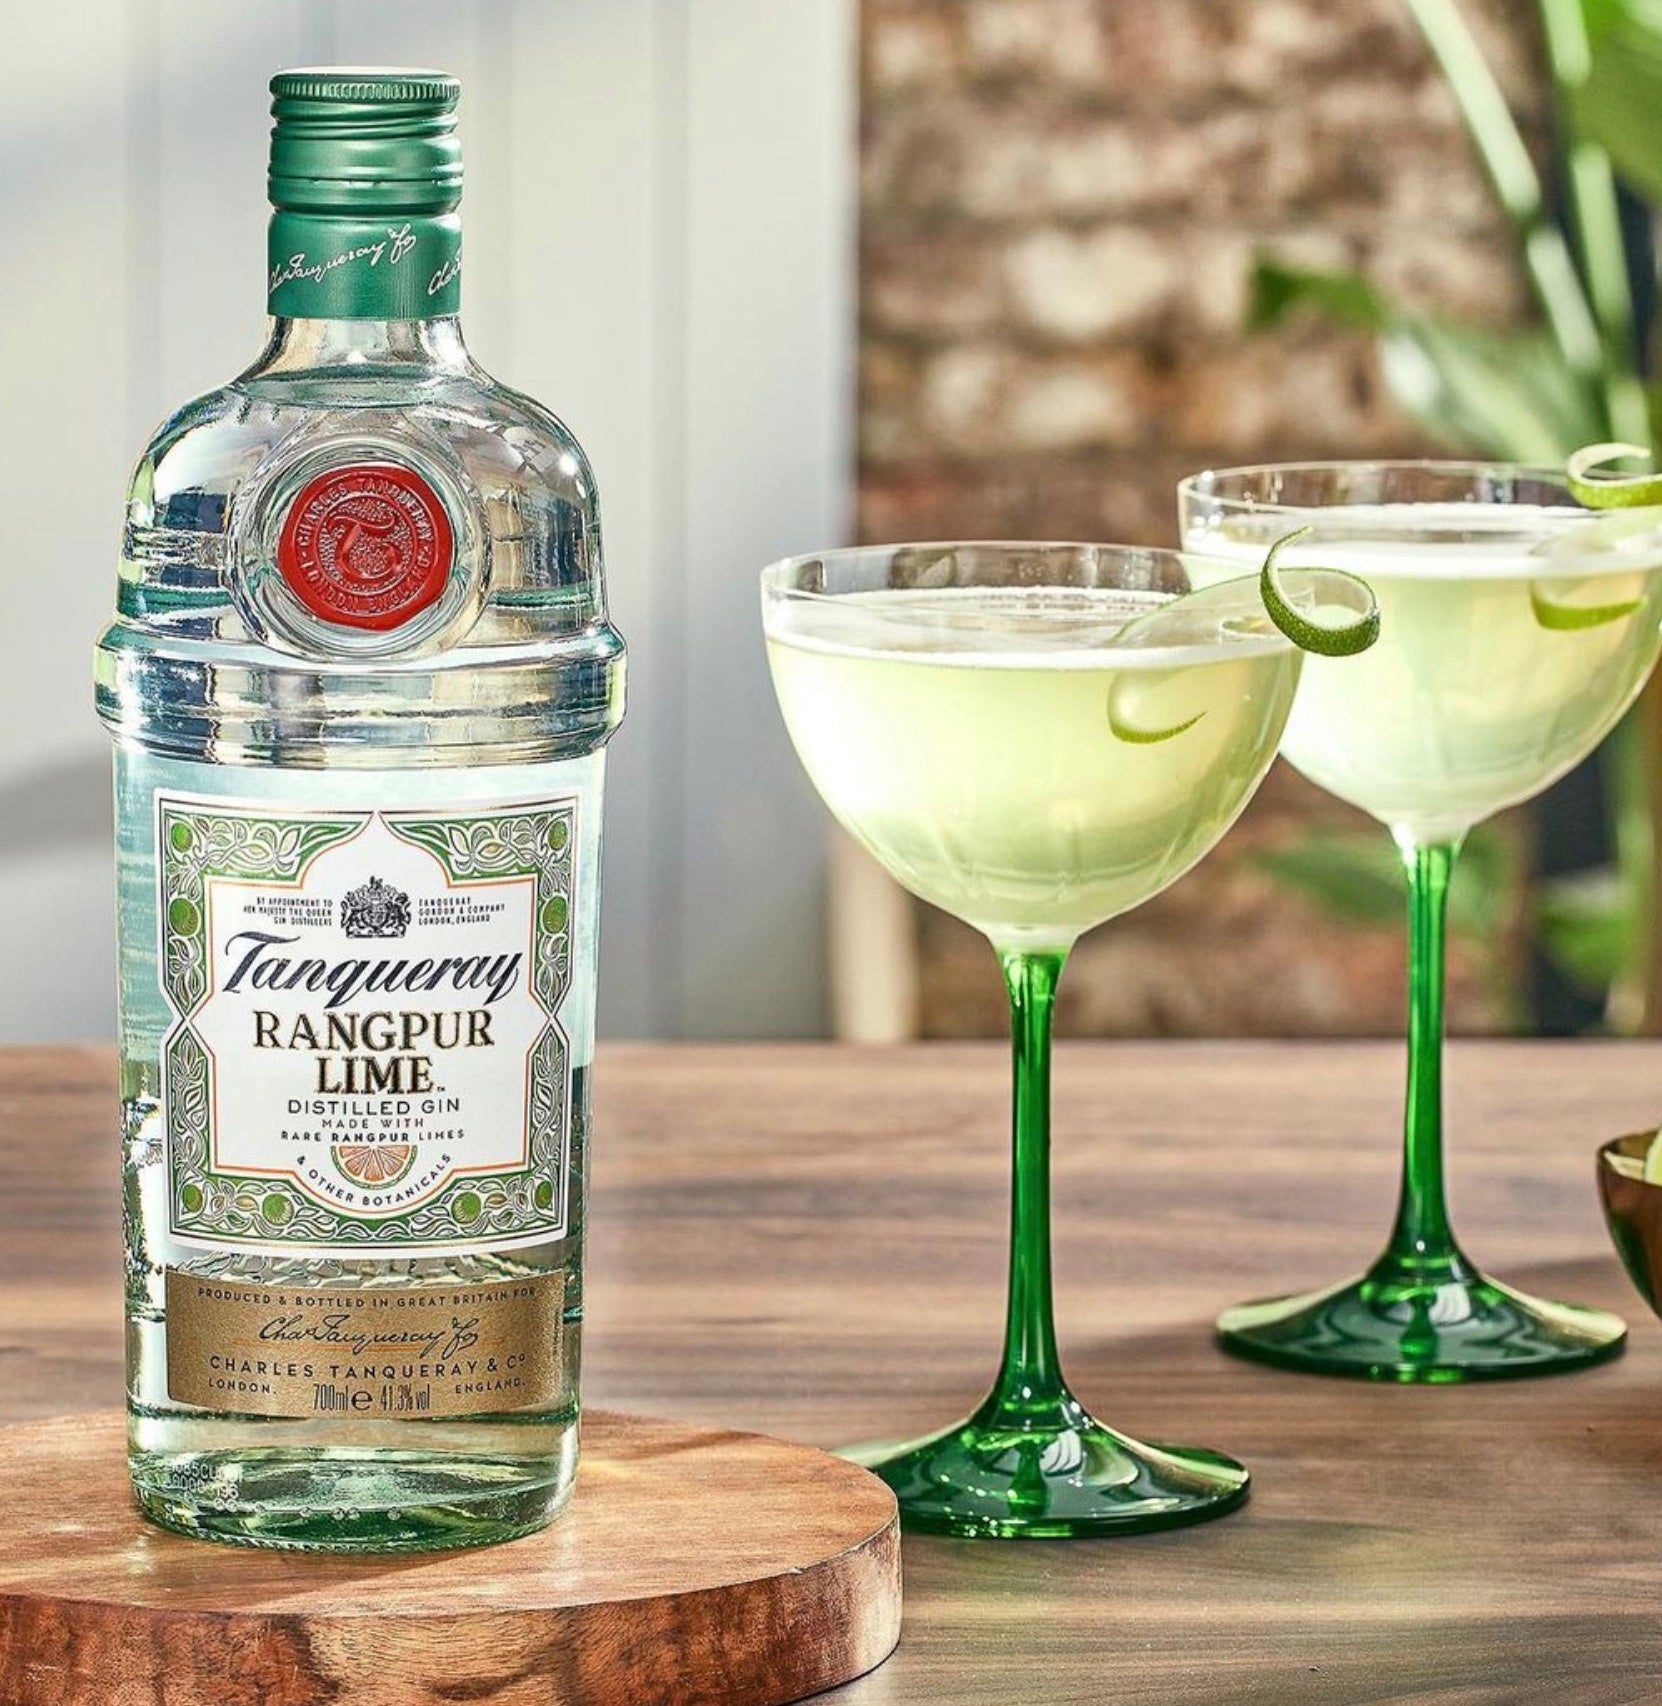 Tanqueray Rangpur pack & Soda Gin 4 Cans Lime